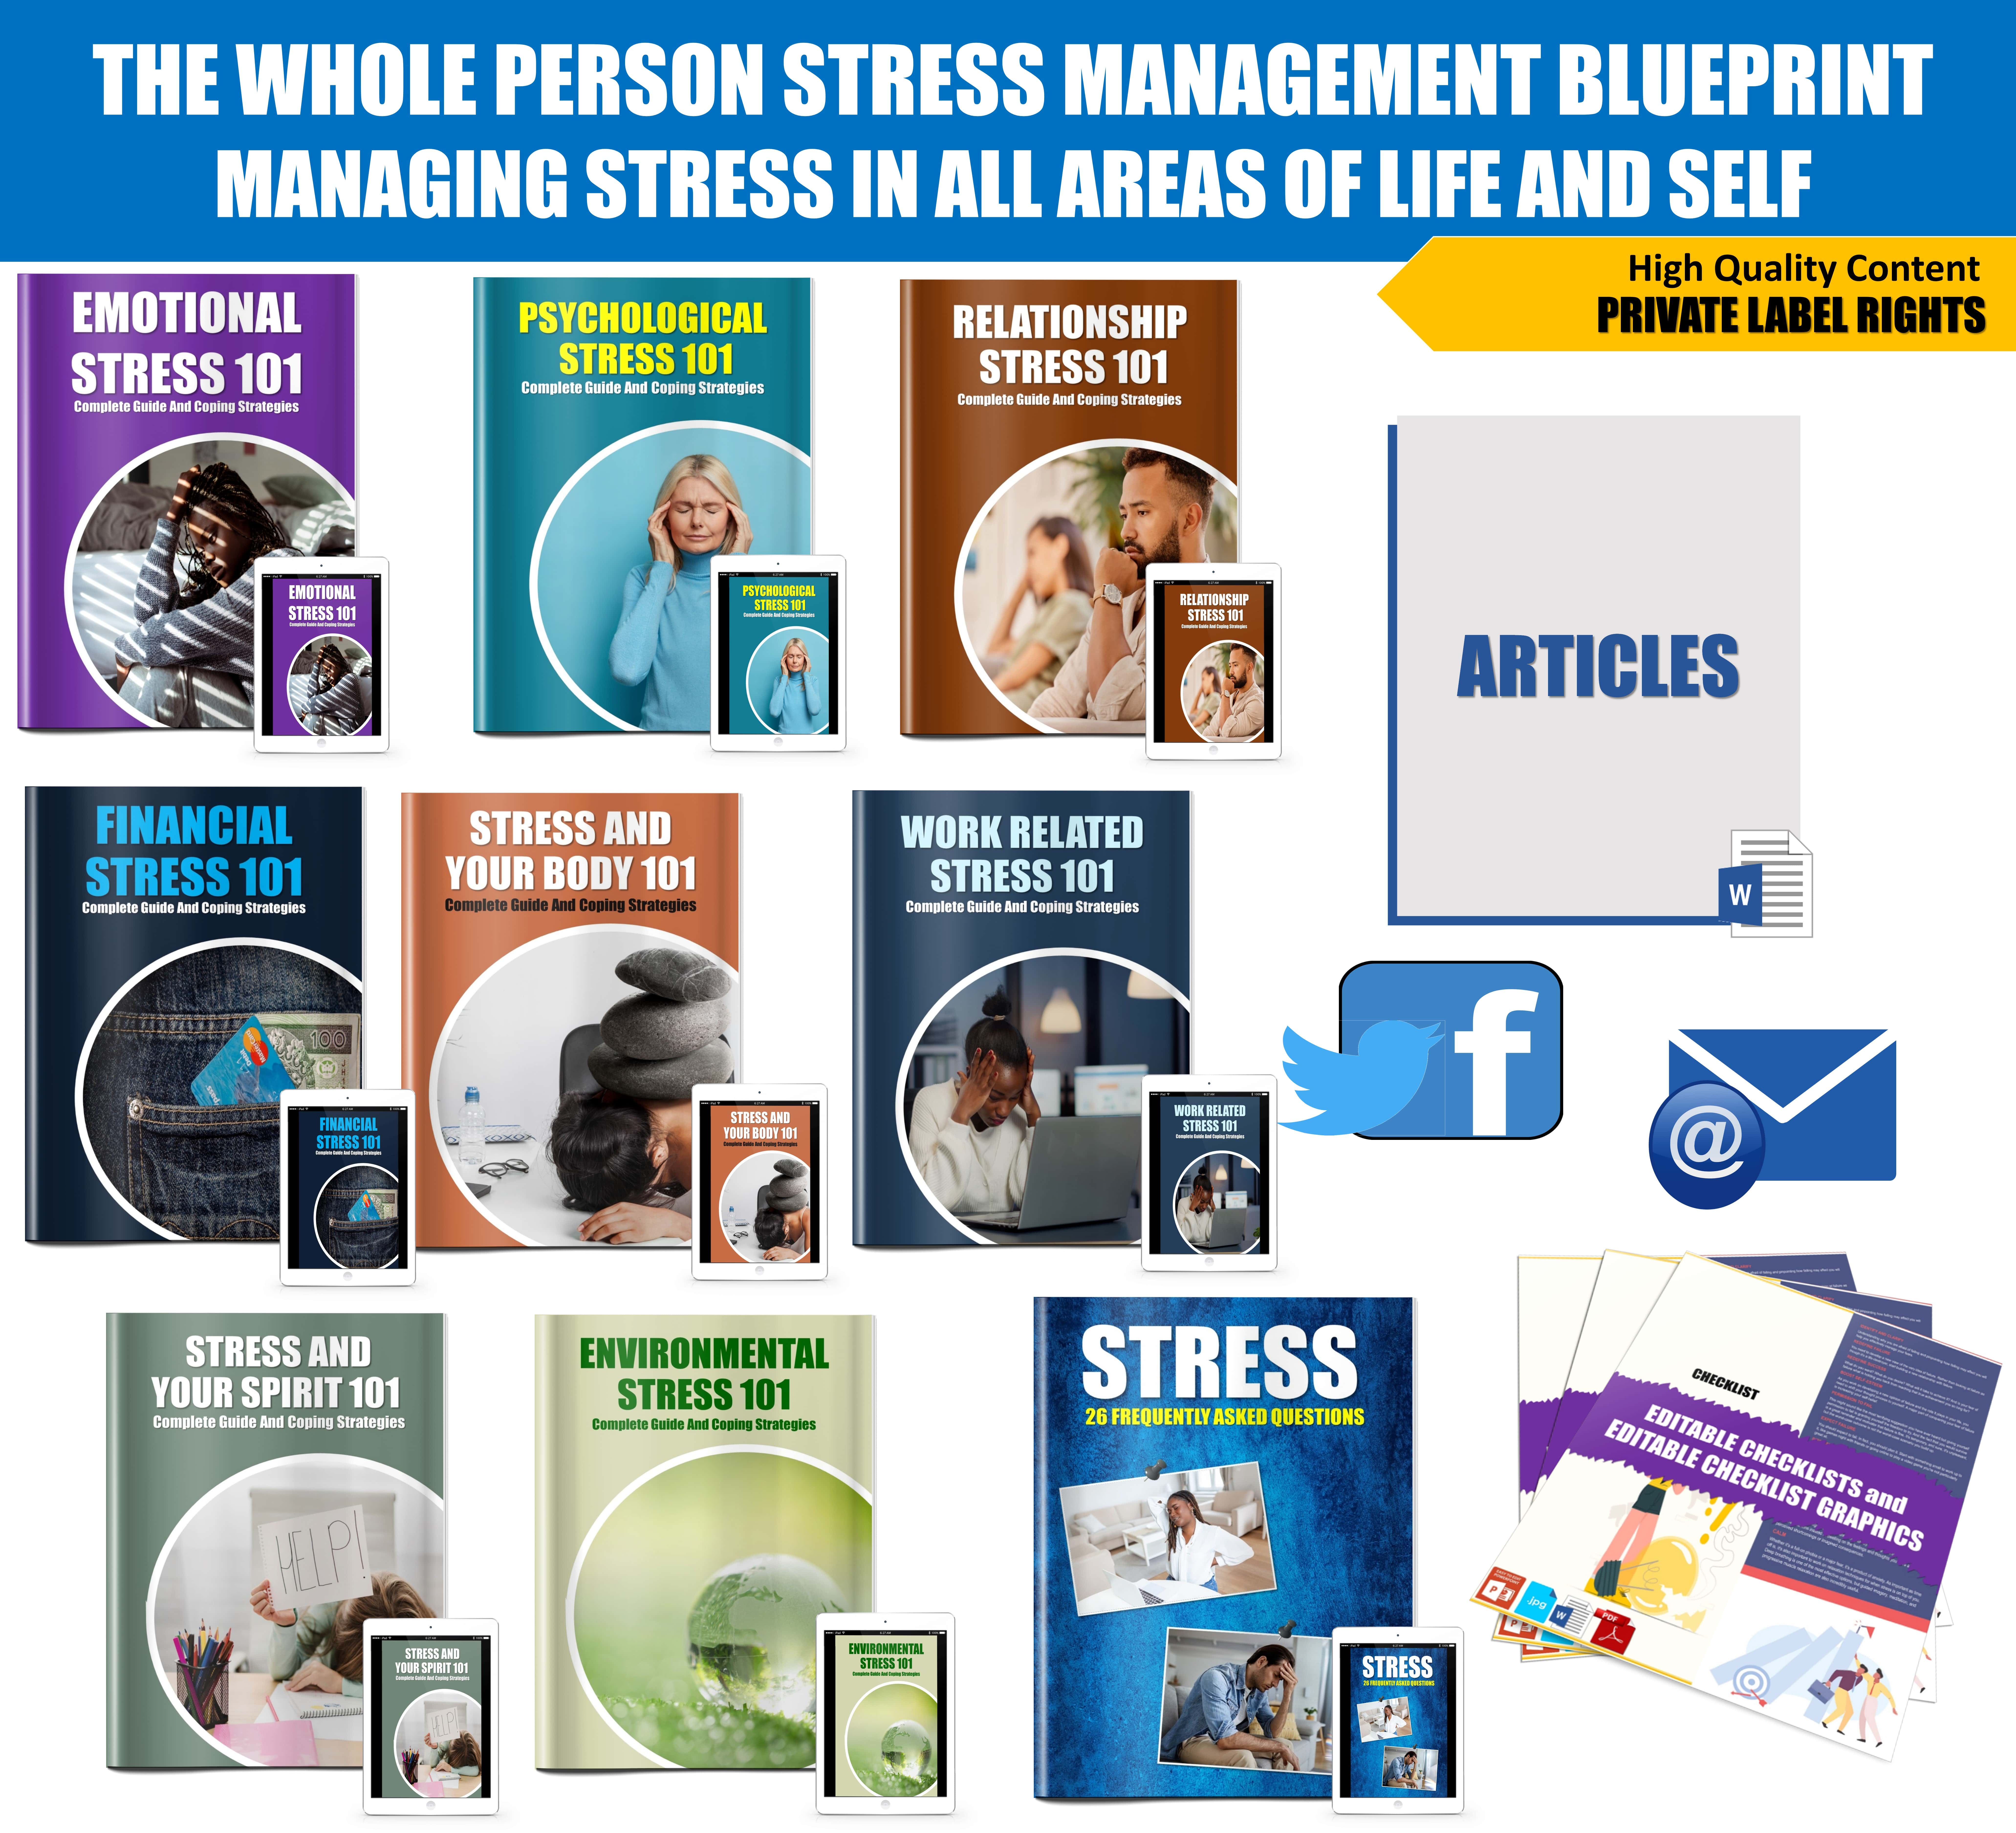 Whole Person Stress Management Blueprint: Managing Stress In All Areas Of Life And Self  Giant Content Pack PLR Rights